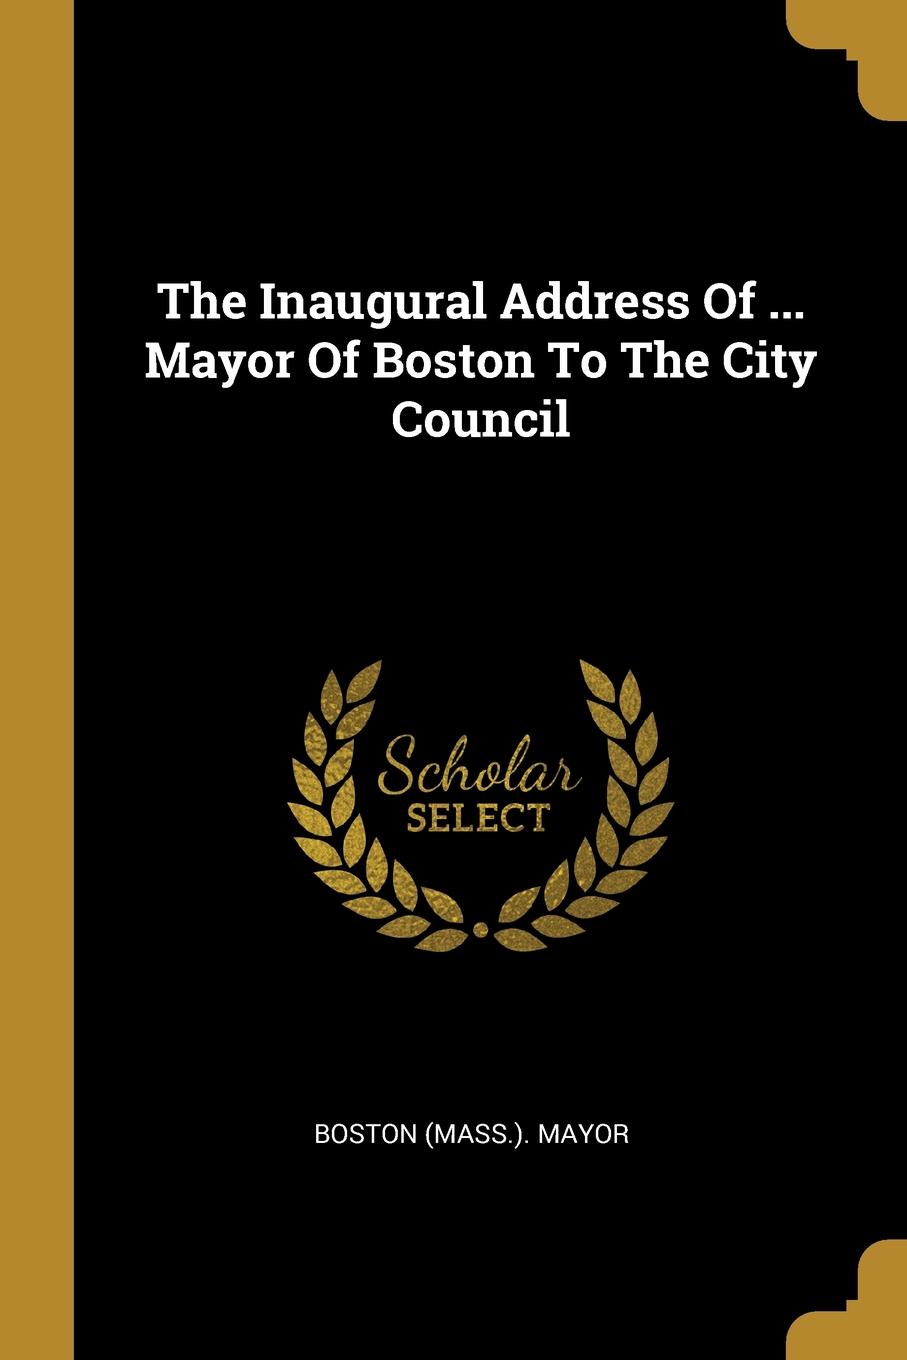 The Inaugural Address Of ... Mayor Of Boston To The City Council